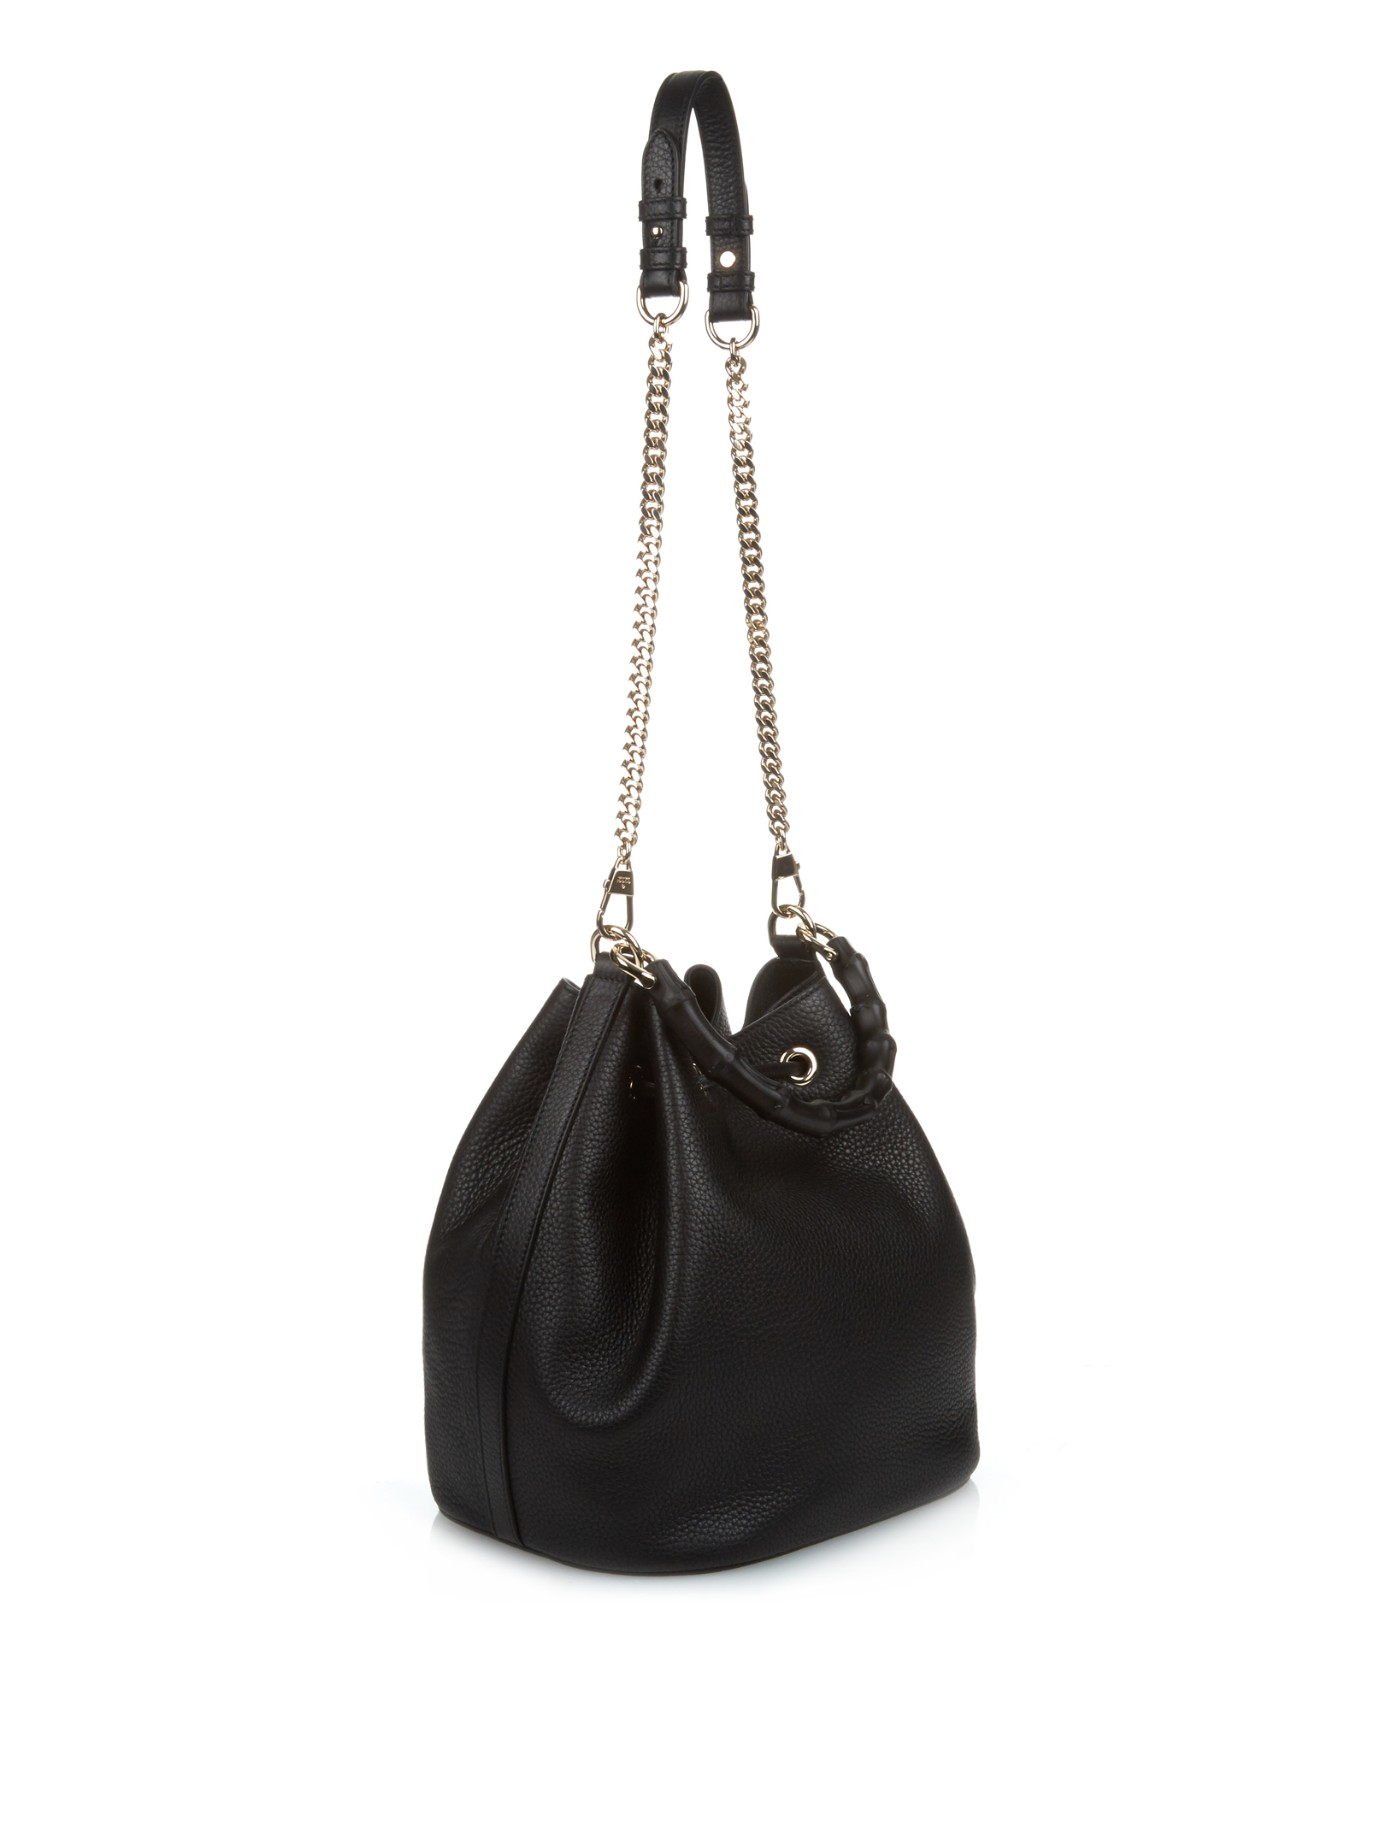 Lyst - Gucci Bamboo Leather Bucket Bag in Black